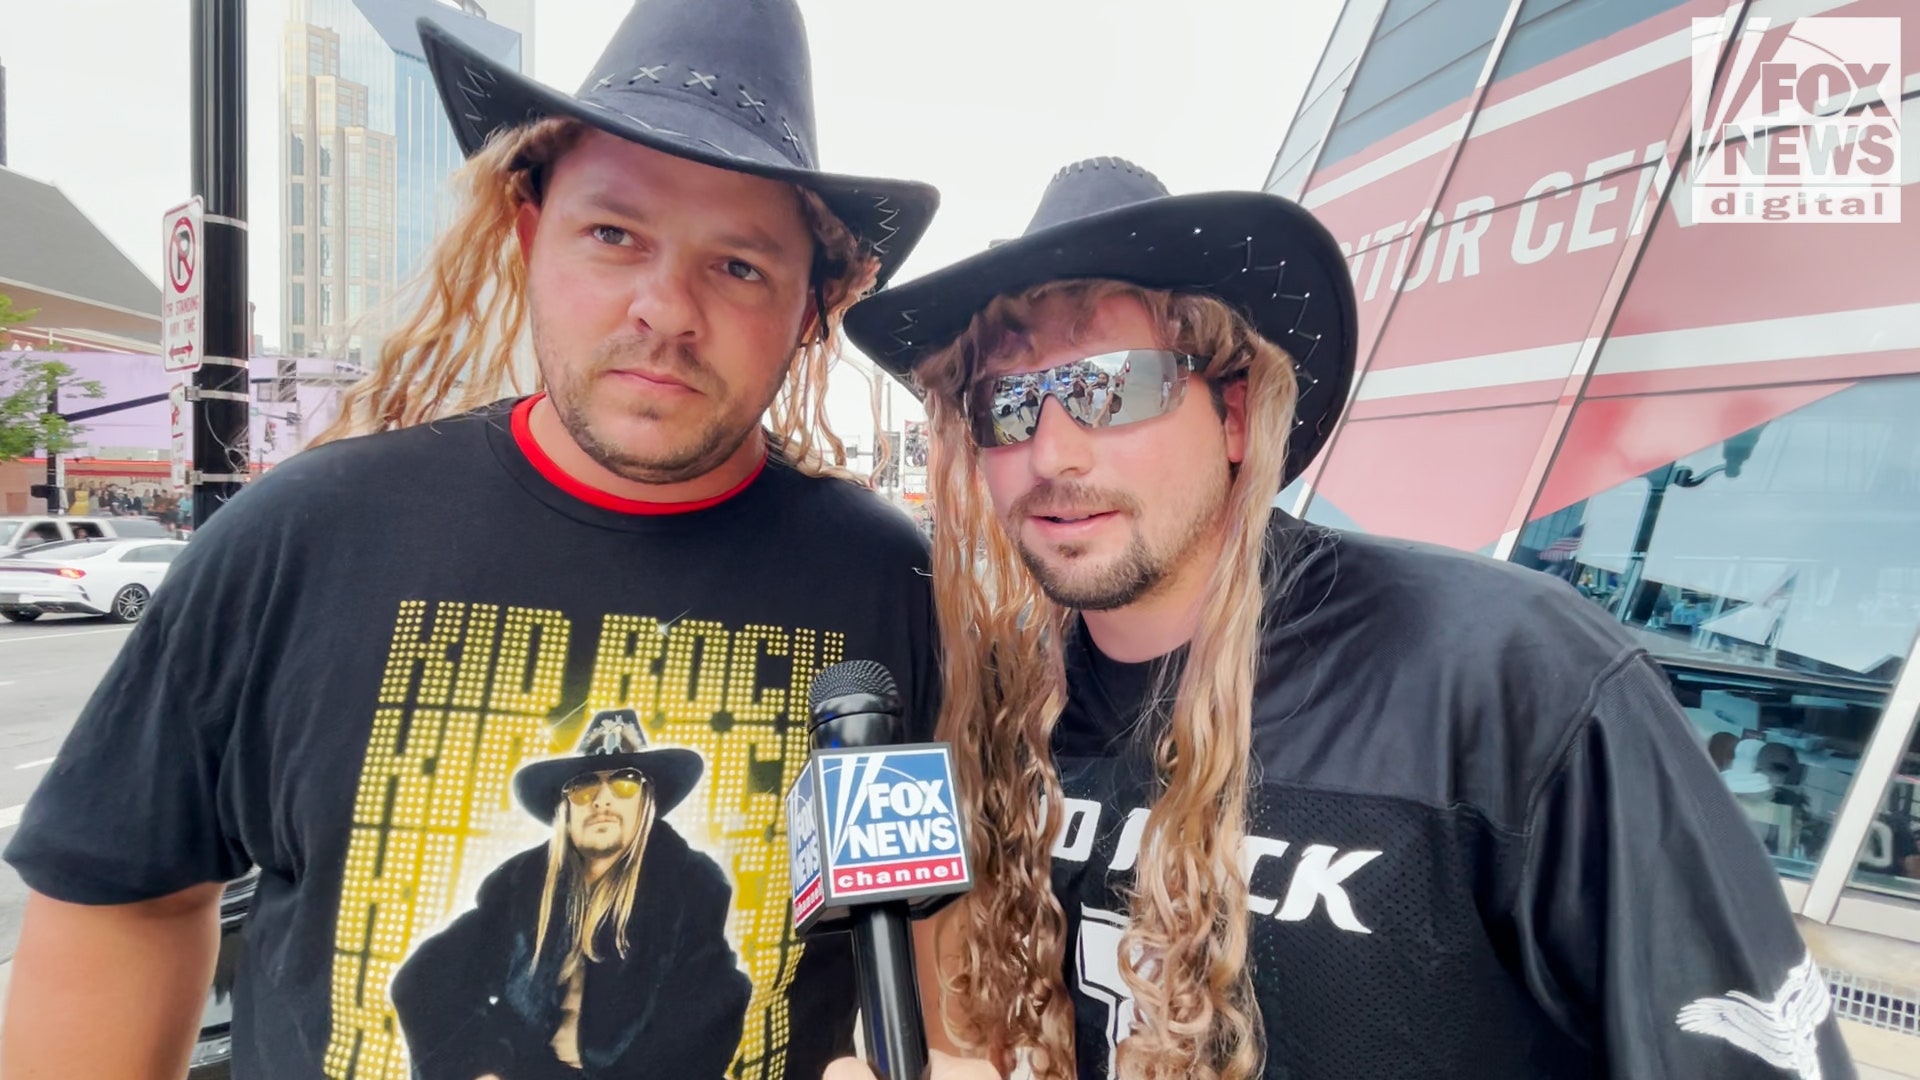 ’Anything but Bud Light’: Kid Rock concertgoers crush beer brand’s hopes of a July Fourth comeback